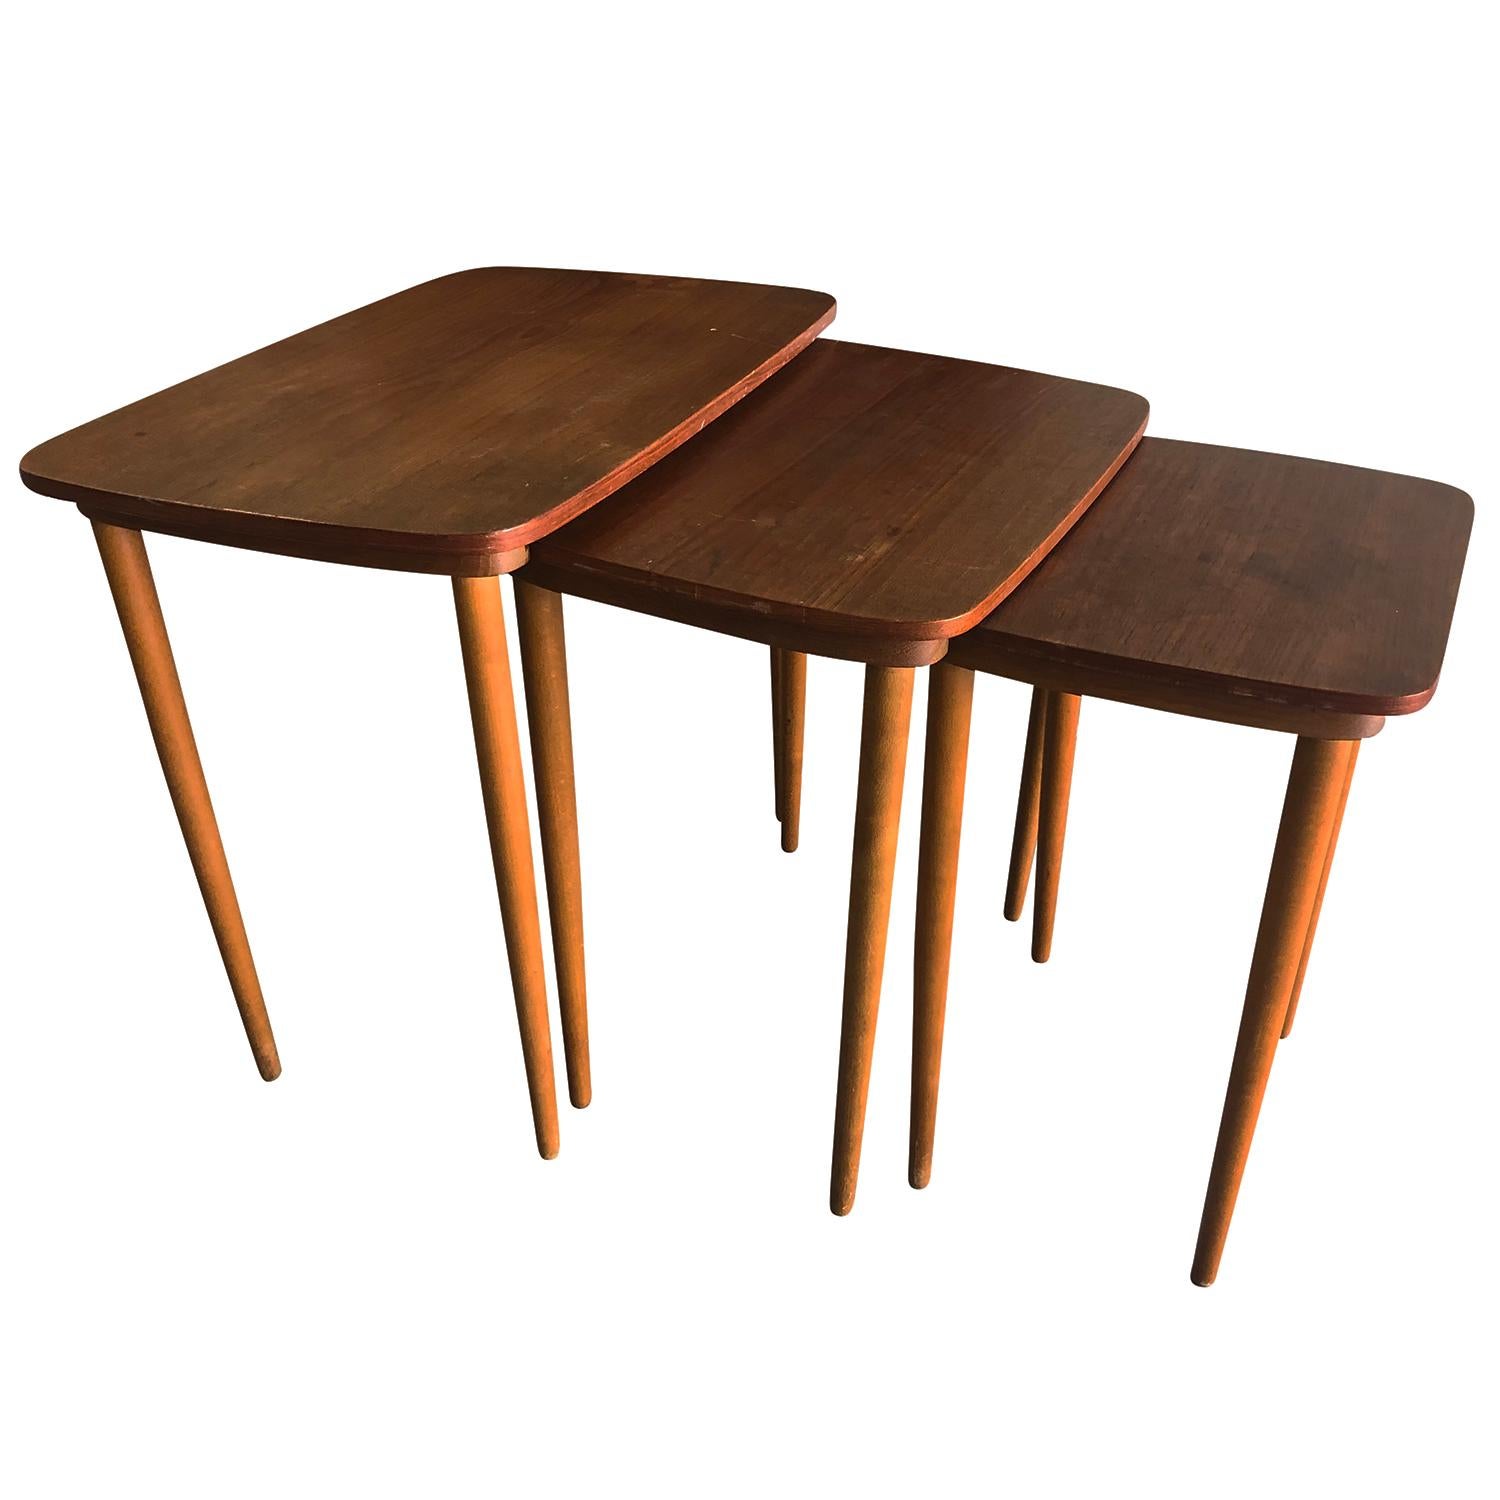 A light-brown, vintage Mid-Century Modern Danish set of three nesting tables made of hand crafted teak and beechwood, in good condition. Wear consistent with age and use, circa 1960, Denmark, Scandinavia.

Measures: Small table 19” H x 14.5” W x